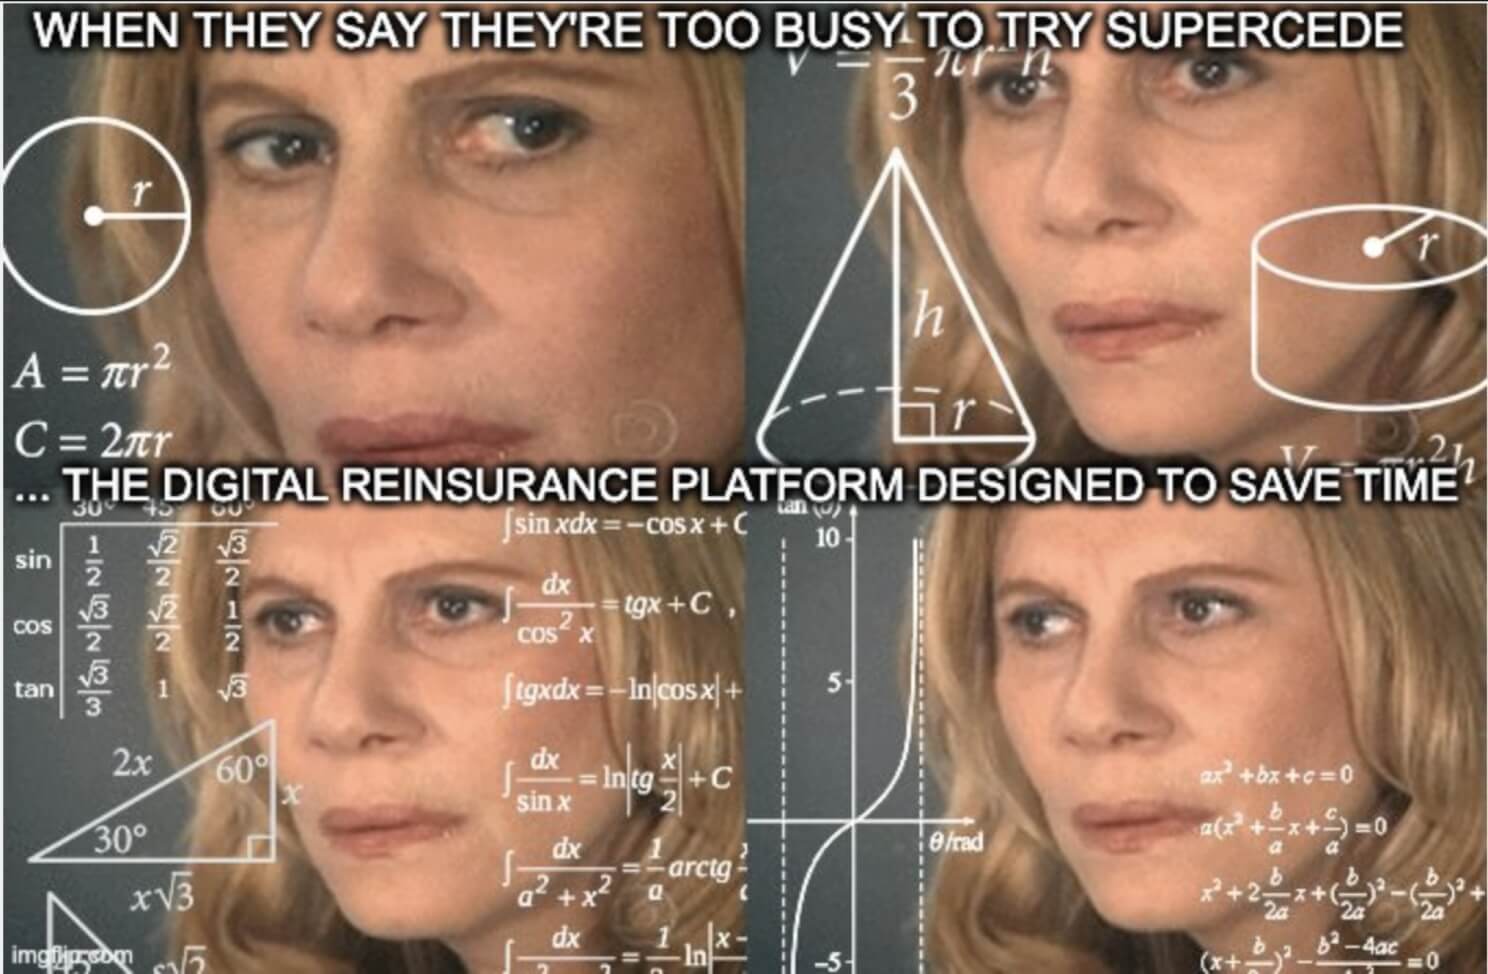 When they say they're busy to try Supercede. The digital Reinsurance platform designed to save time